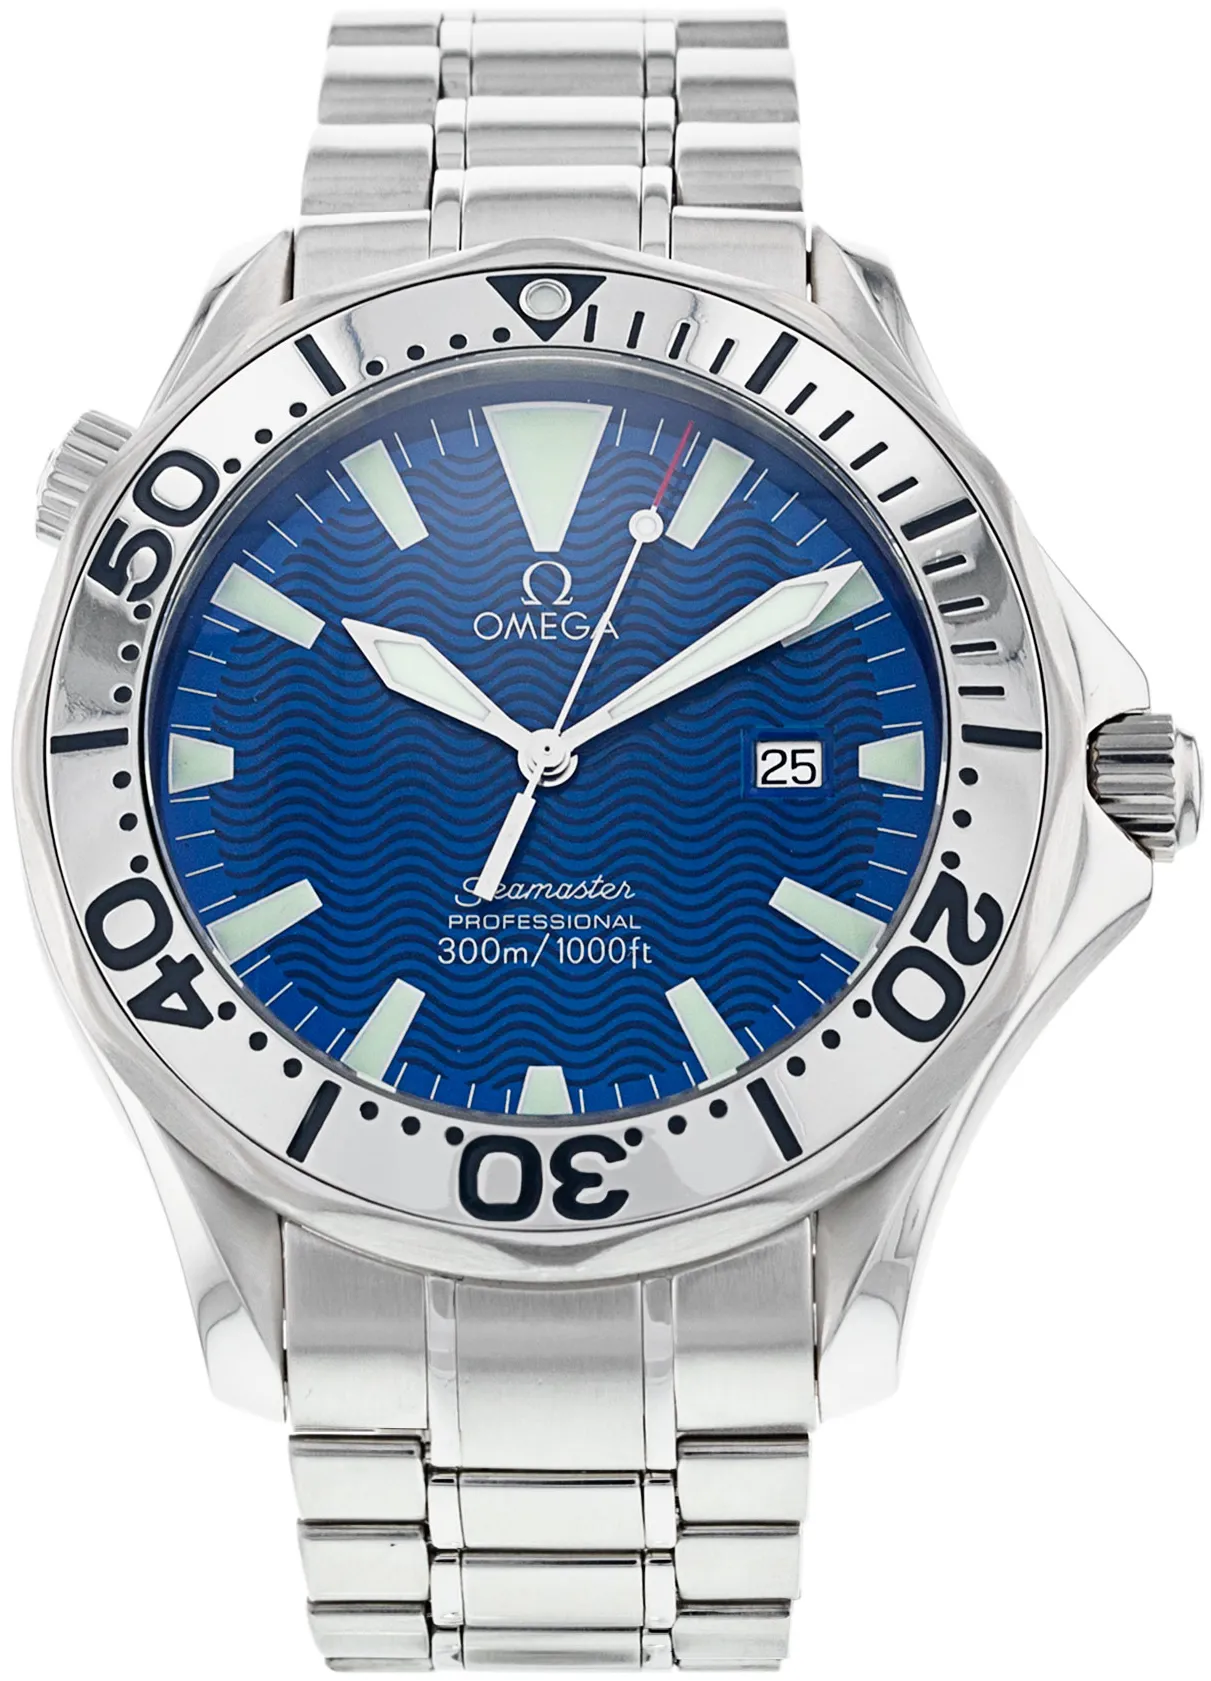 Omega Seamaster Diver 300M 2265.80.00 41mm Stainless steel